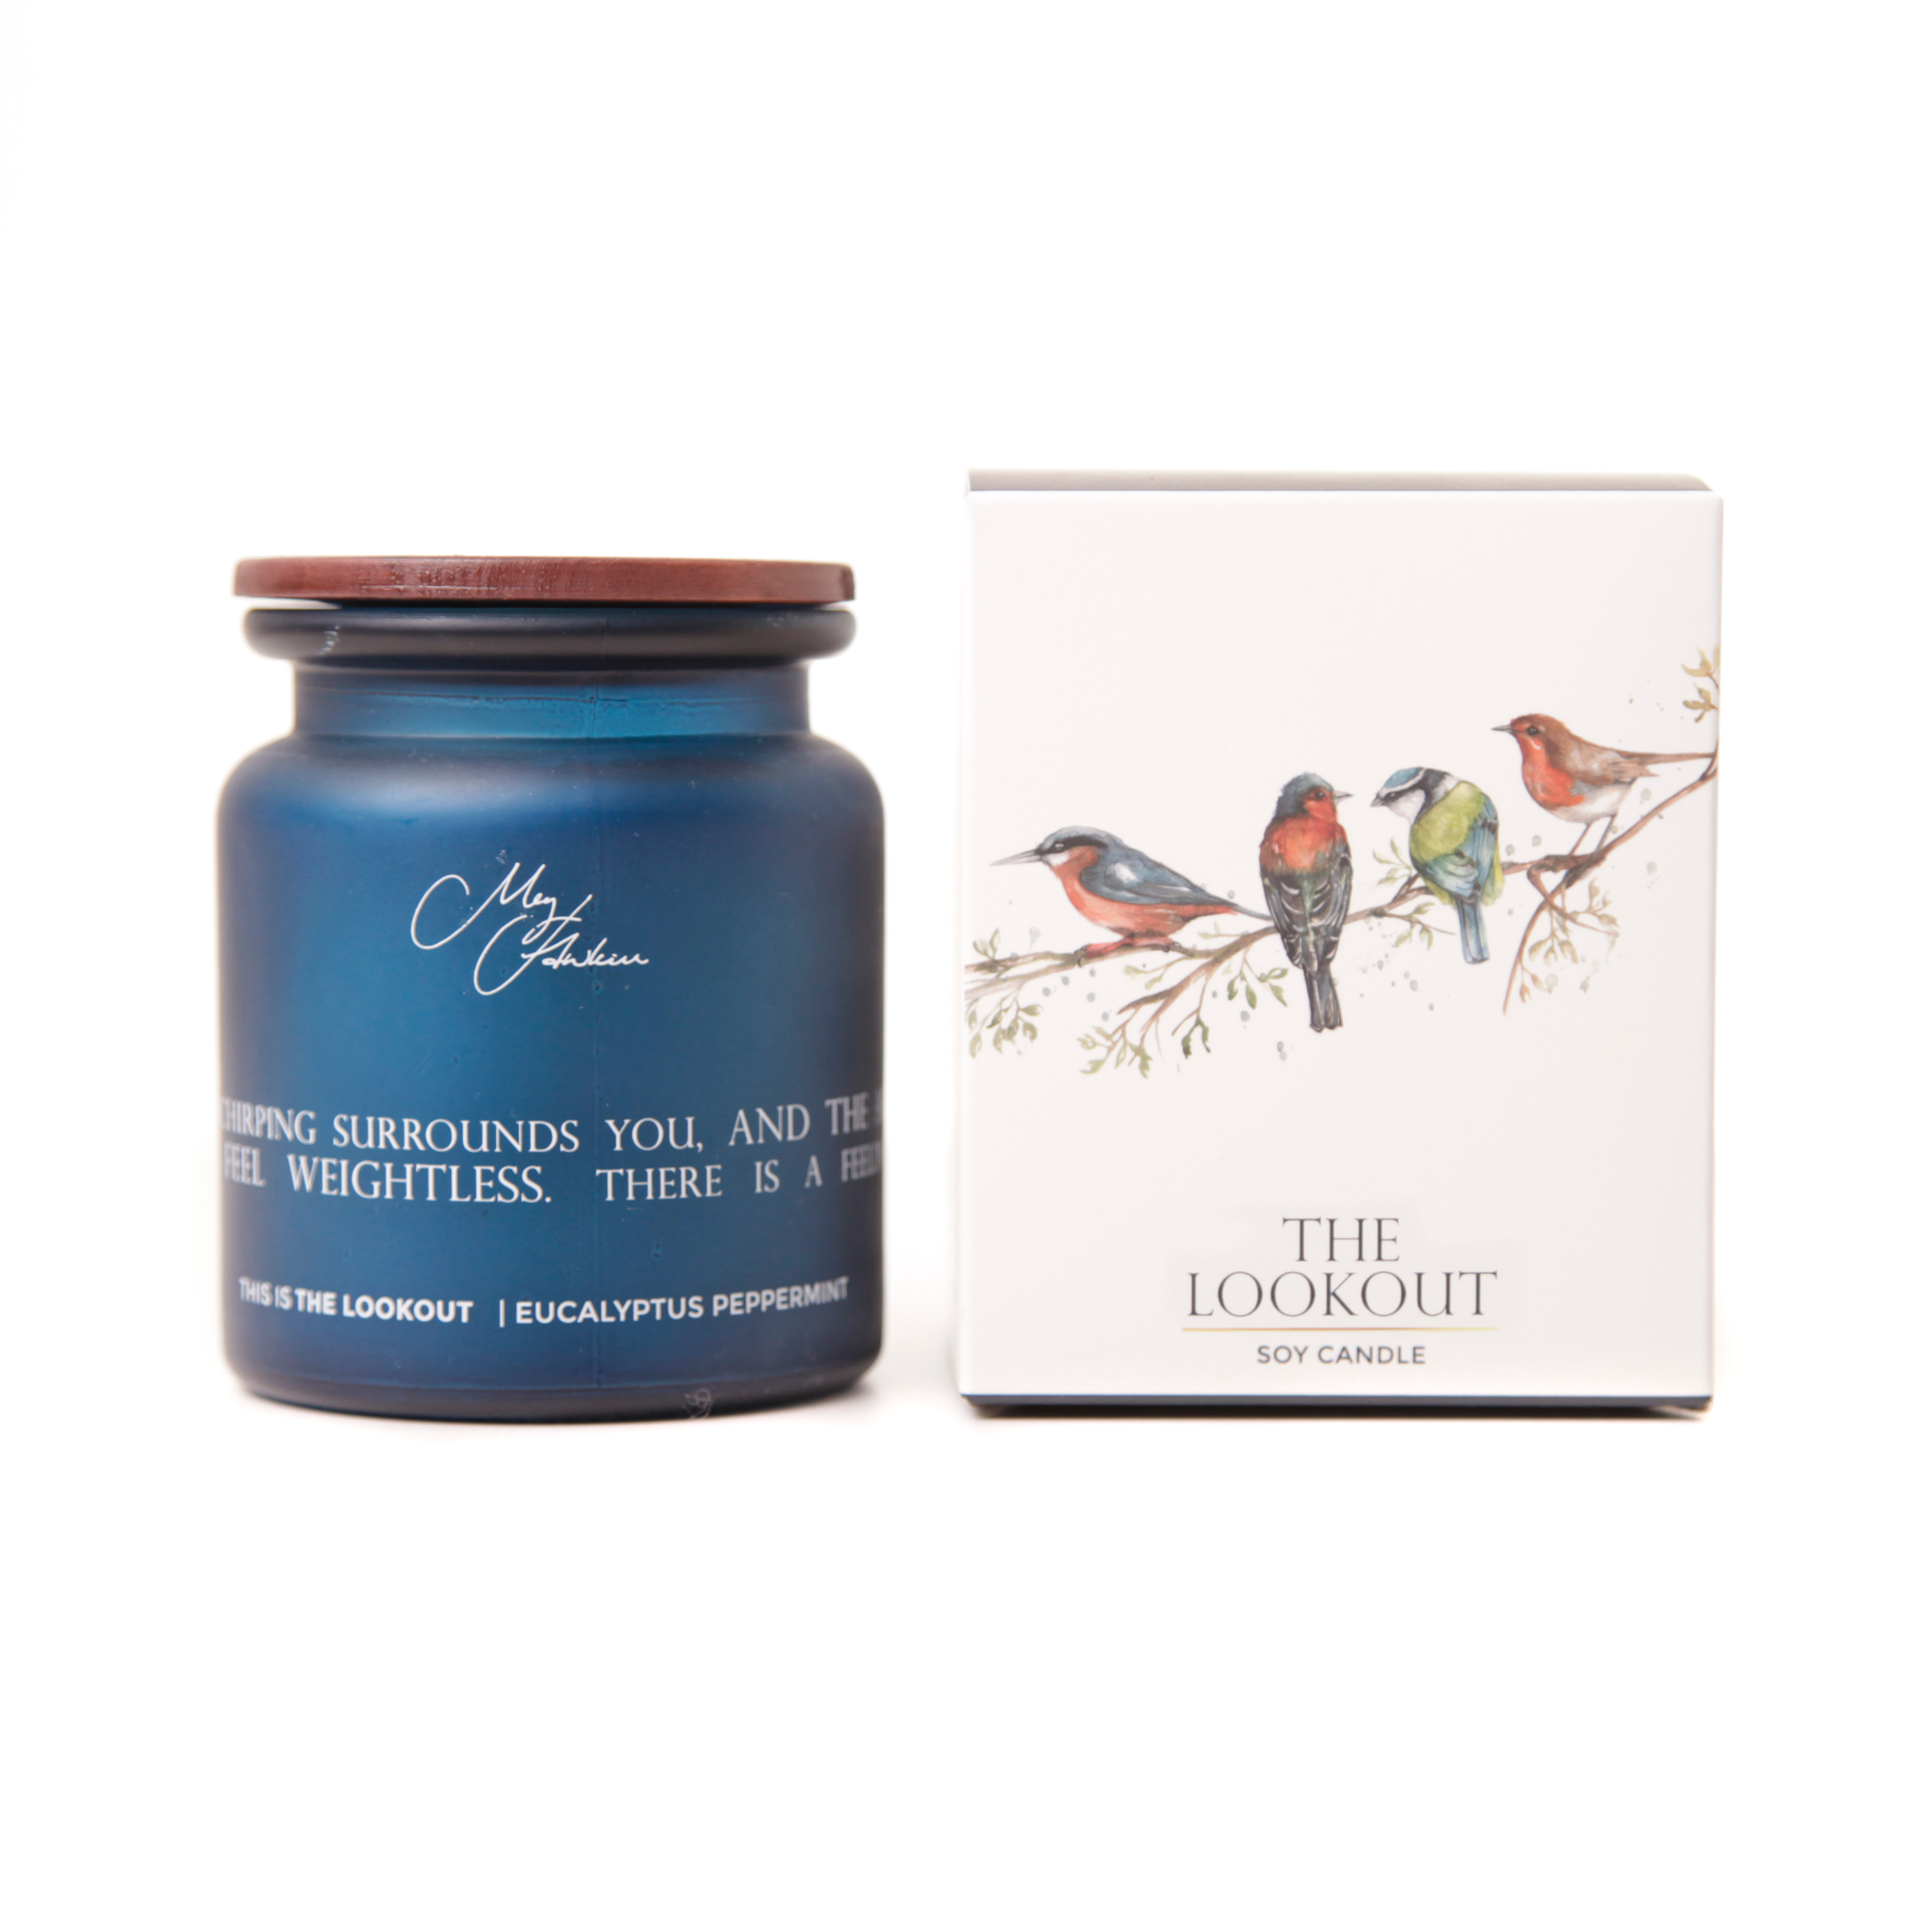 'The Lookout' British Birds Design Candle